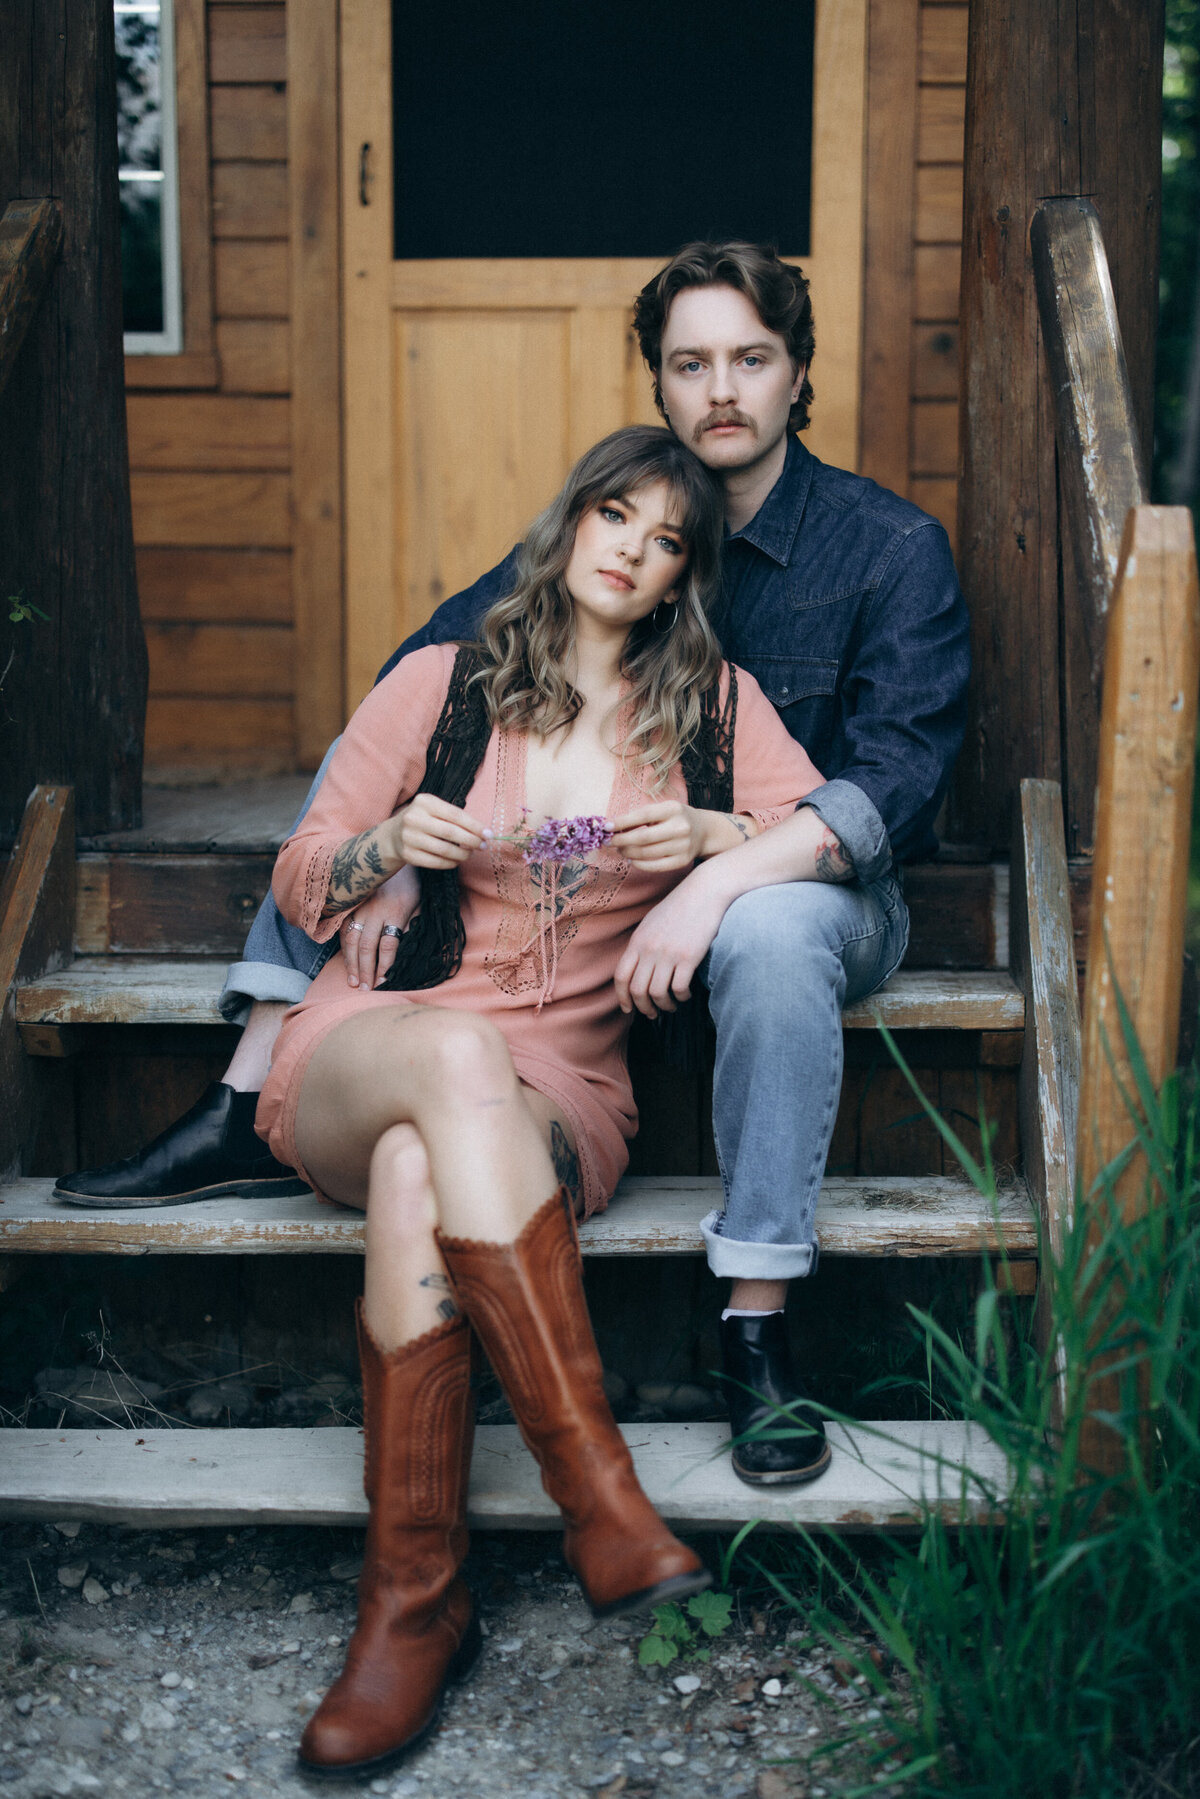 vpc-couples-vintage-cabin-shoot-29